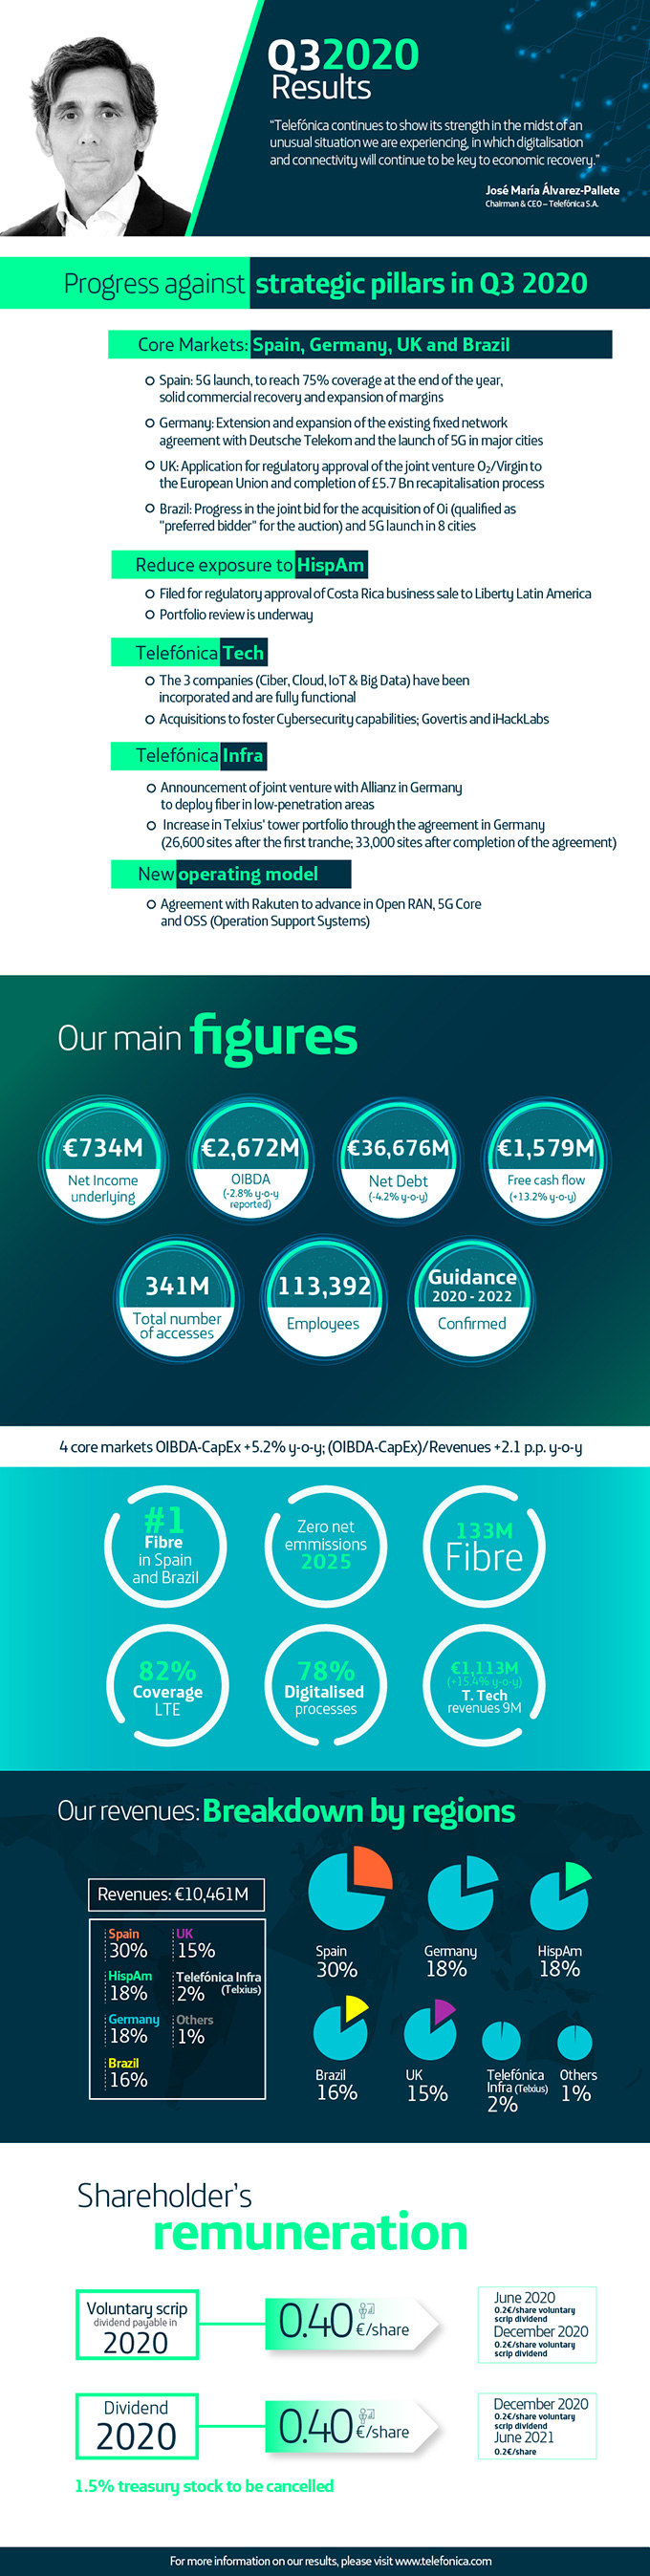 Q3 2020 Results - Infograhics, Financial results January-September 2020